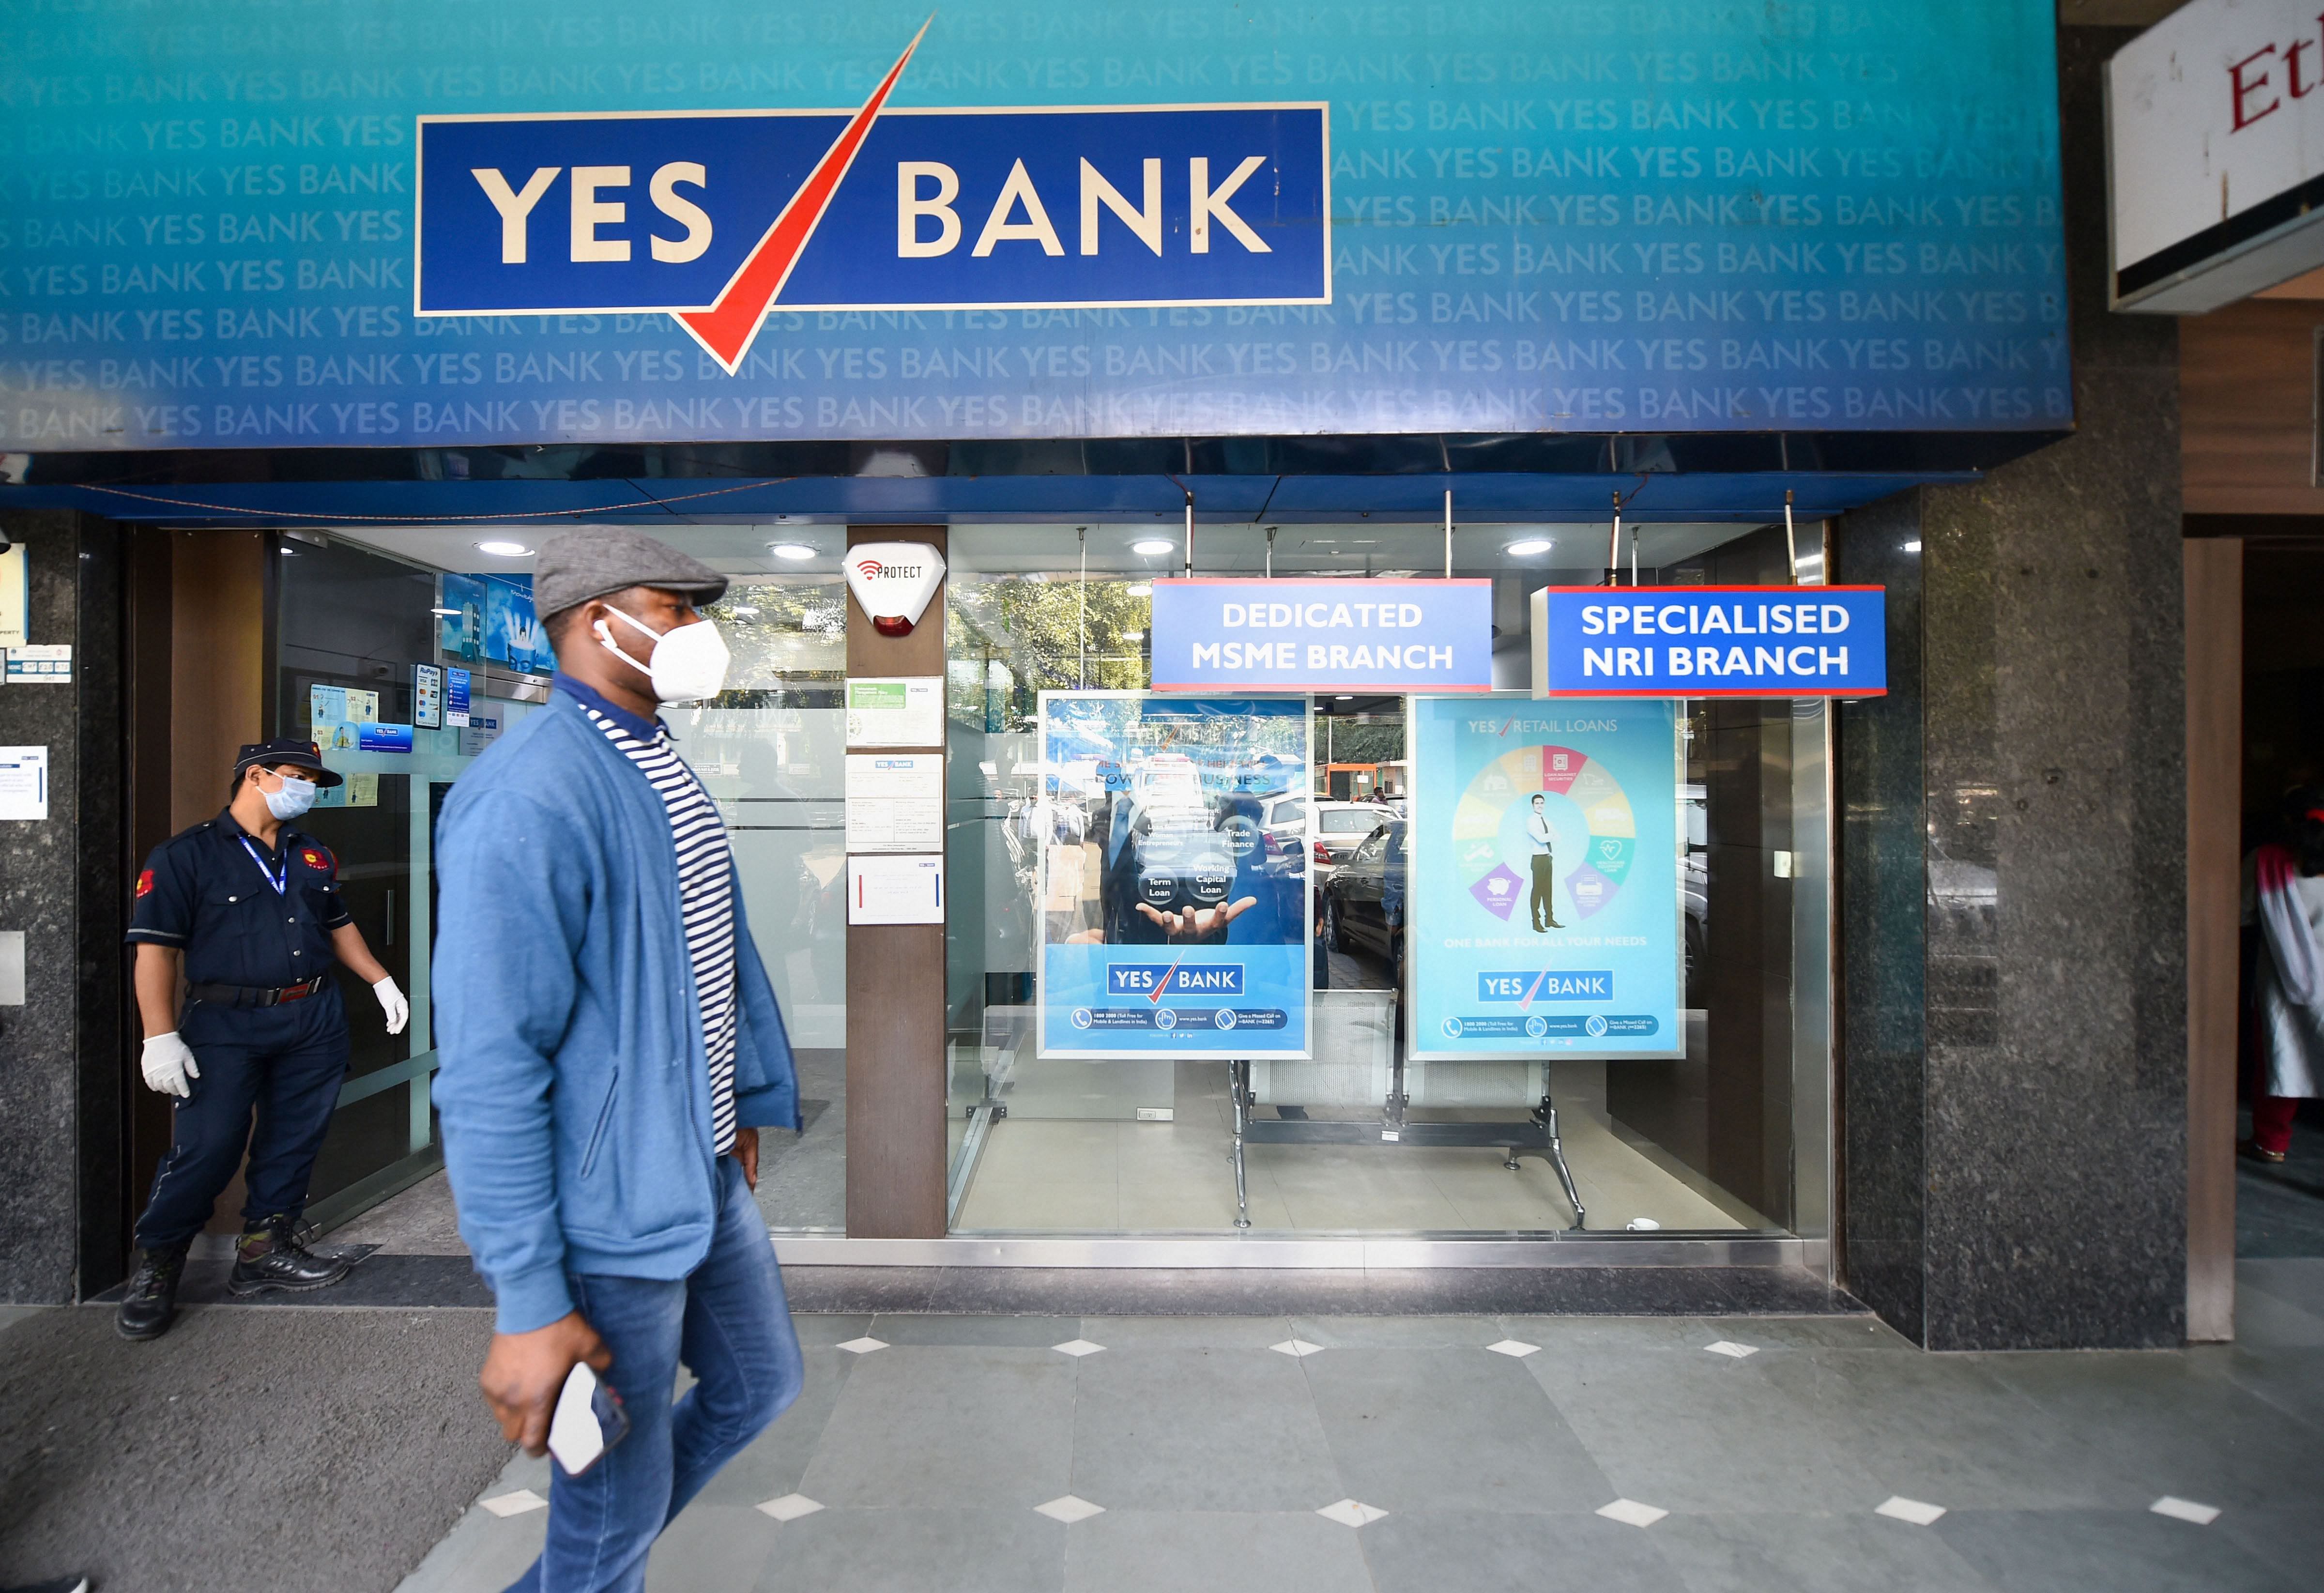  A pedestrian wears a mask to mitigate the coronavirus pandemic as he walks past a branch of Yes Bank, in New Delhi. Credits: PTI Photo